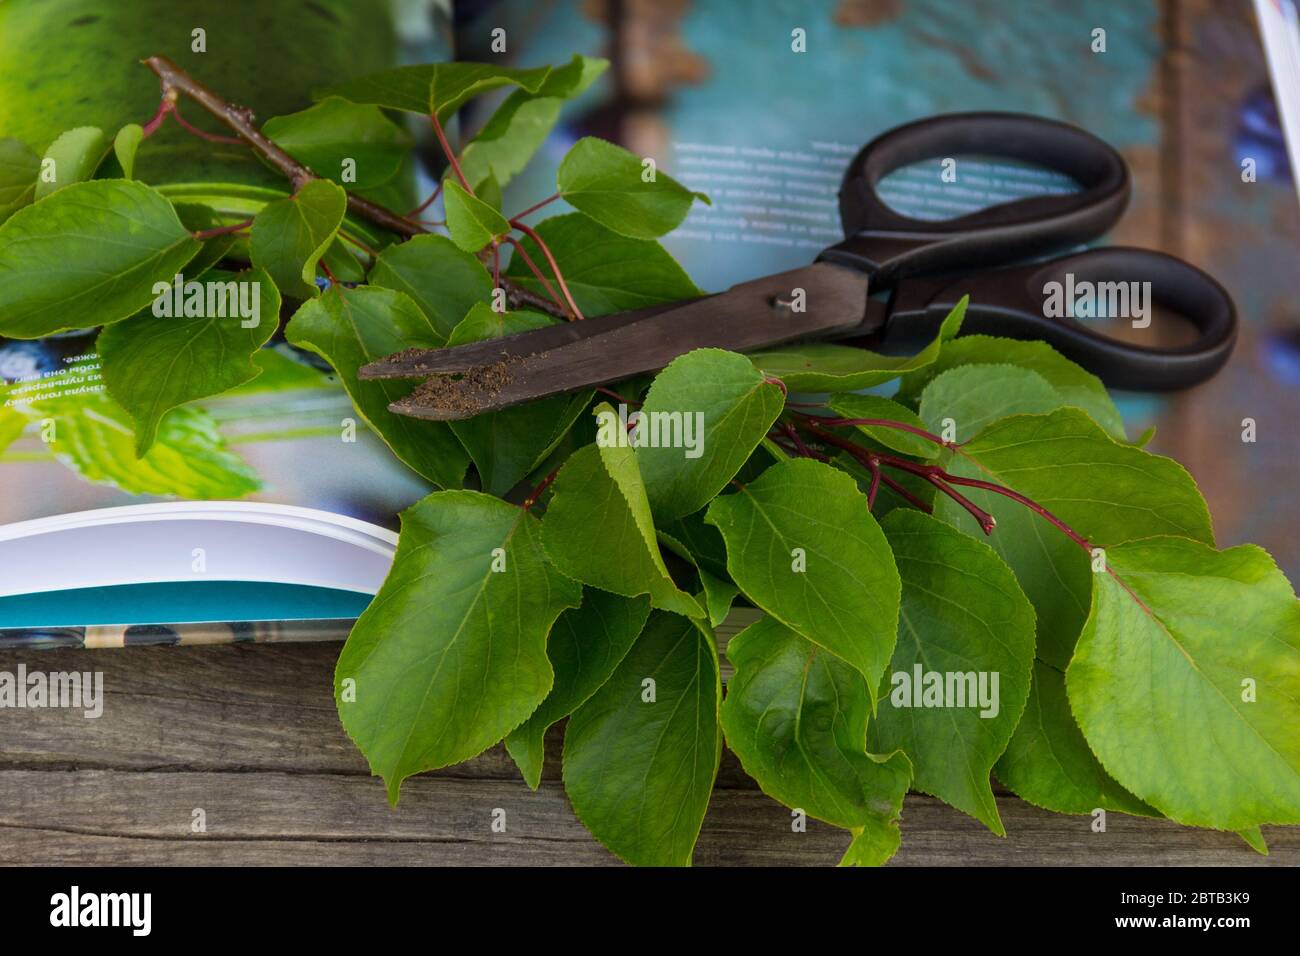 Gardening scissors, book and green branch on rustic background. Gardening time. Stock Photo